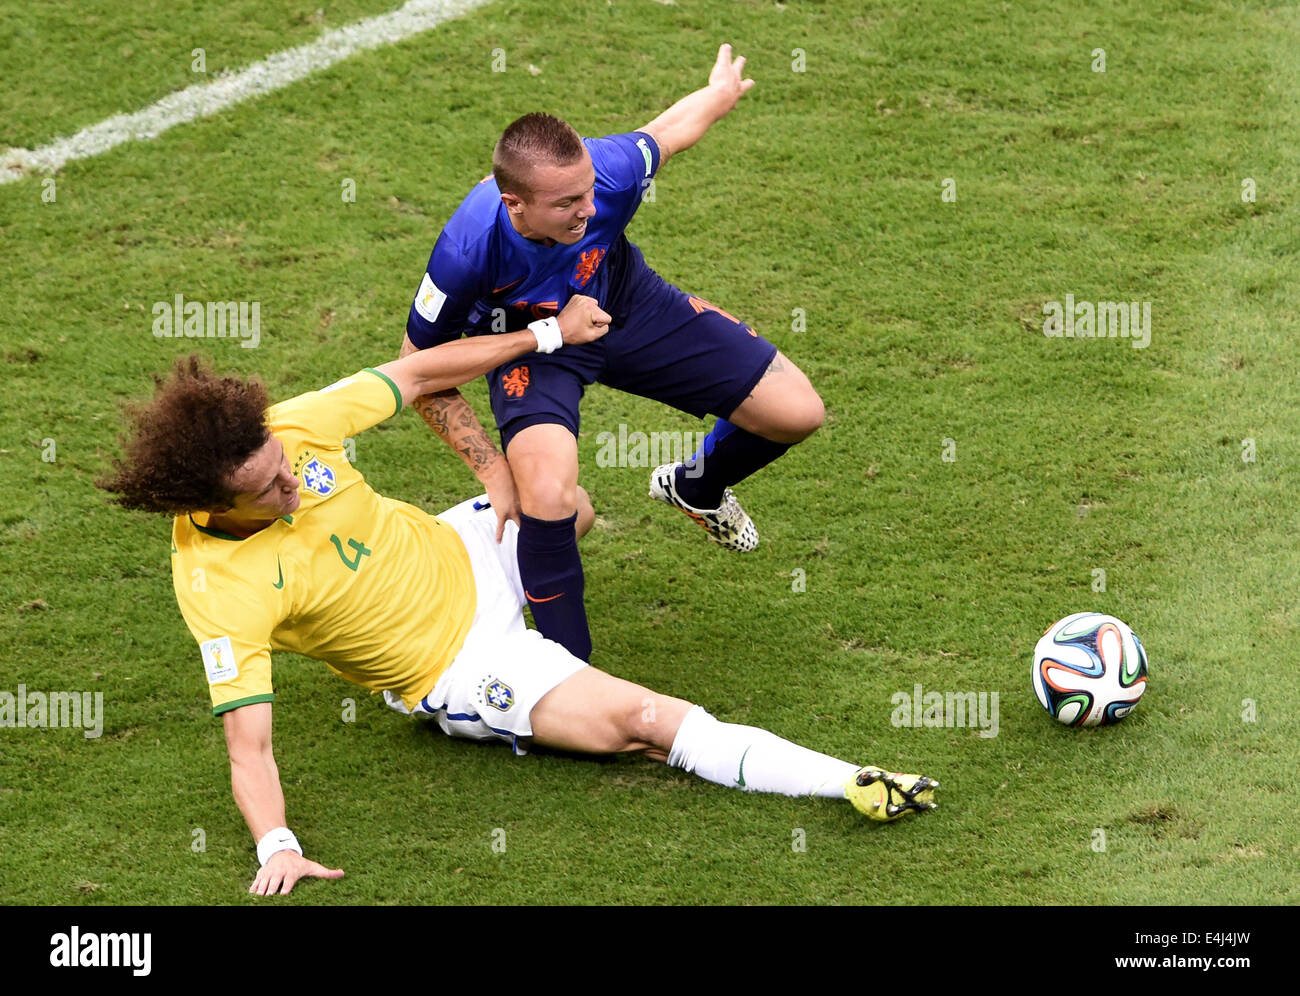 Brasilia, Brazil. 12th July, 2014. Netherlands' Jordy Clasie (R) vies with Brazil's David Luiz during the third place play-off match between Brazil and Netherlands of 2014 FIFA World Cup at the Estadio Nacional Stadium in Brasilia, Brazil, on July 12, 2014. Credit:  Lui Siu Wai/Xinhua/Alamy Live News Stock Photo